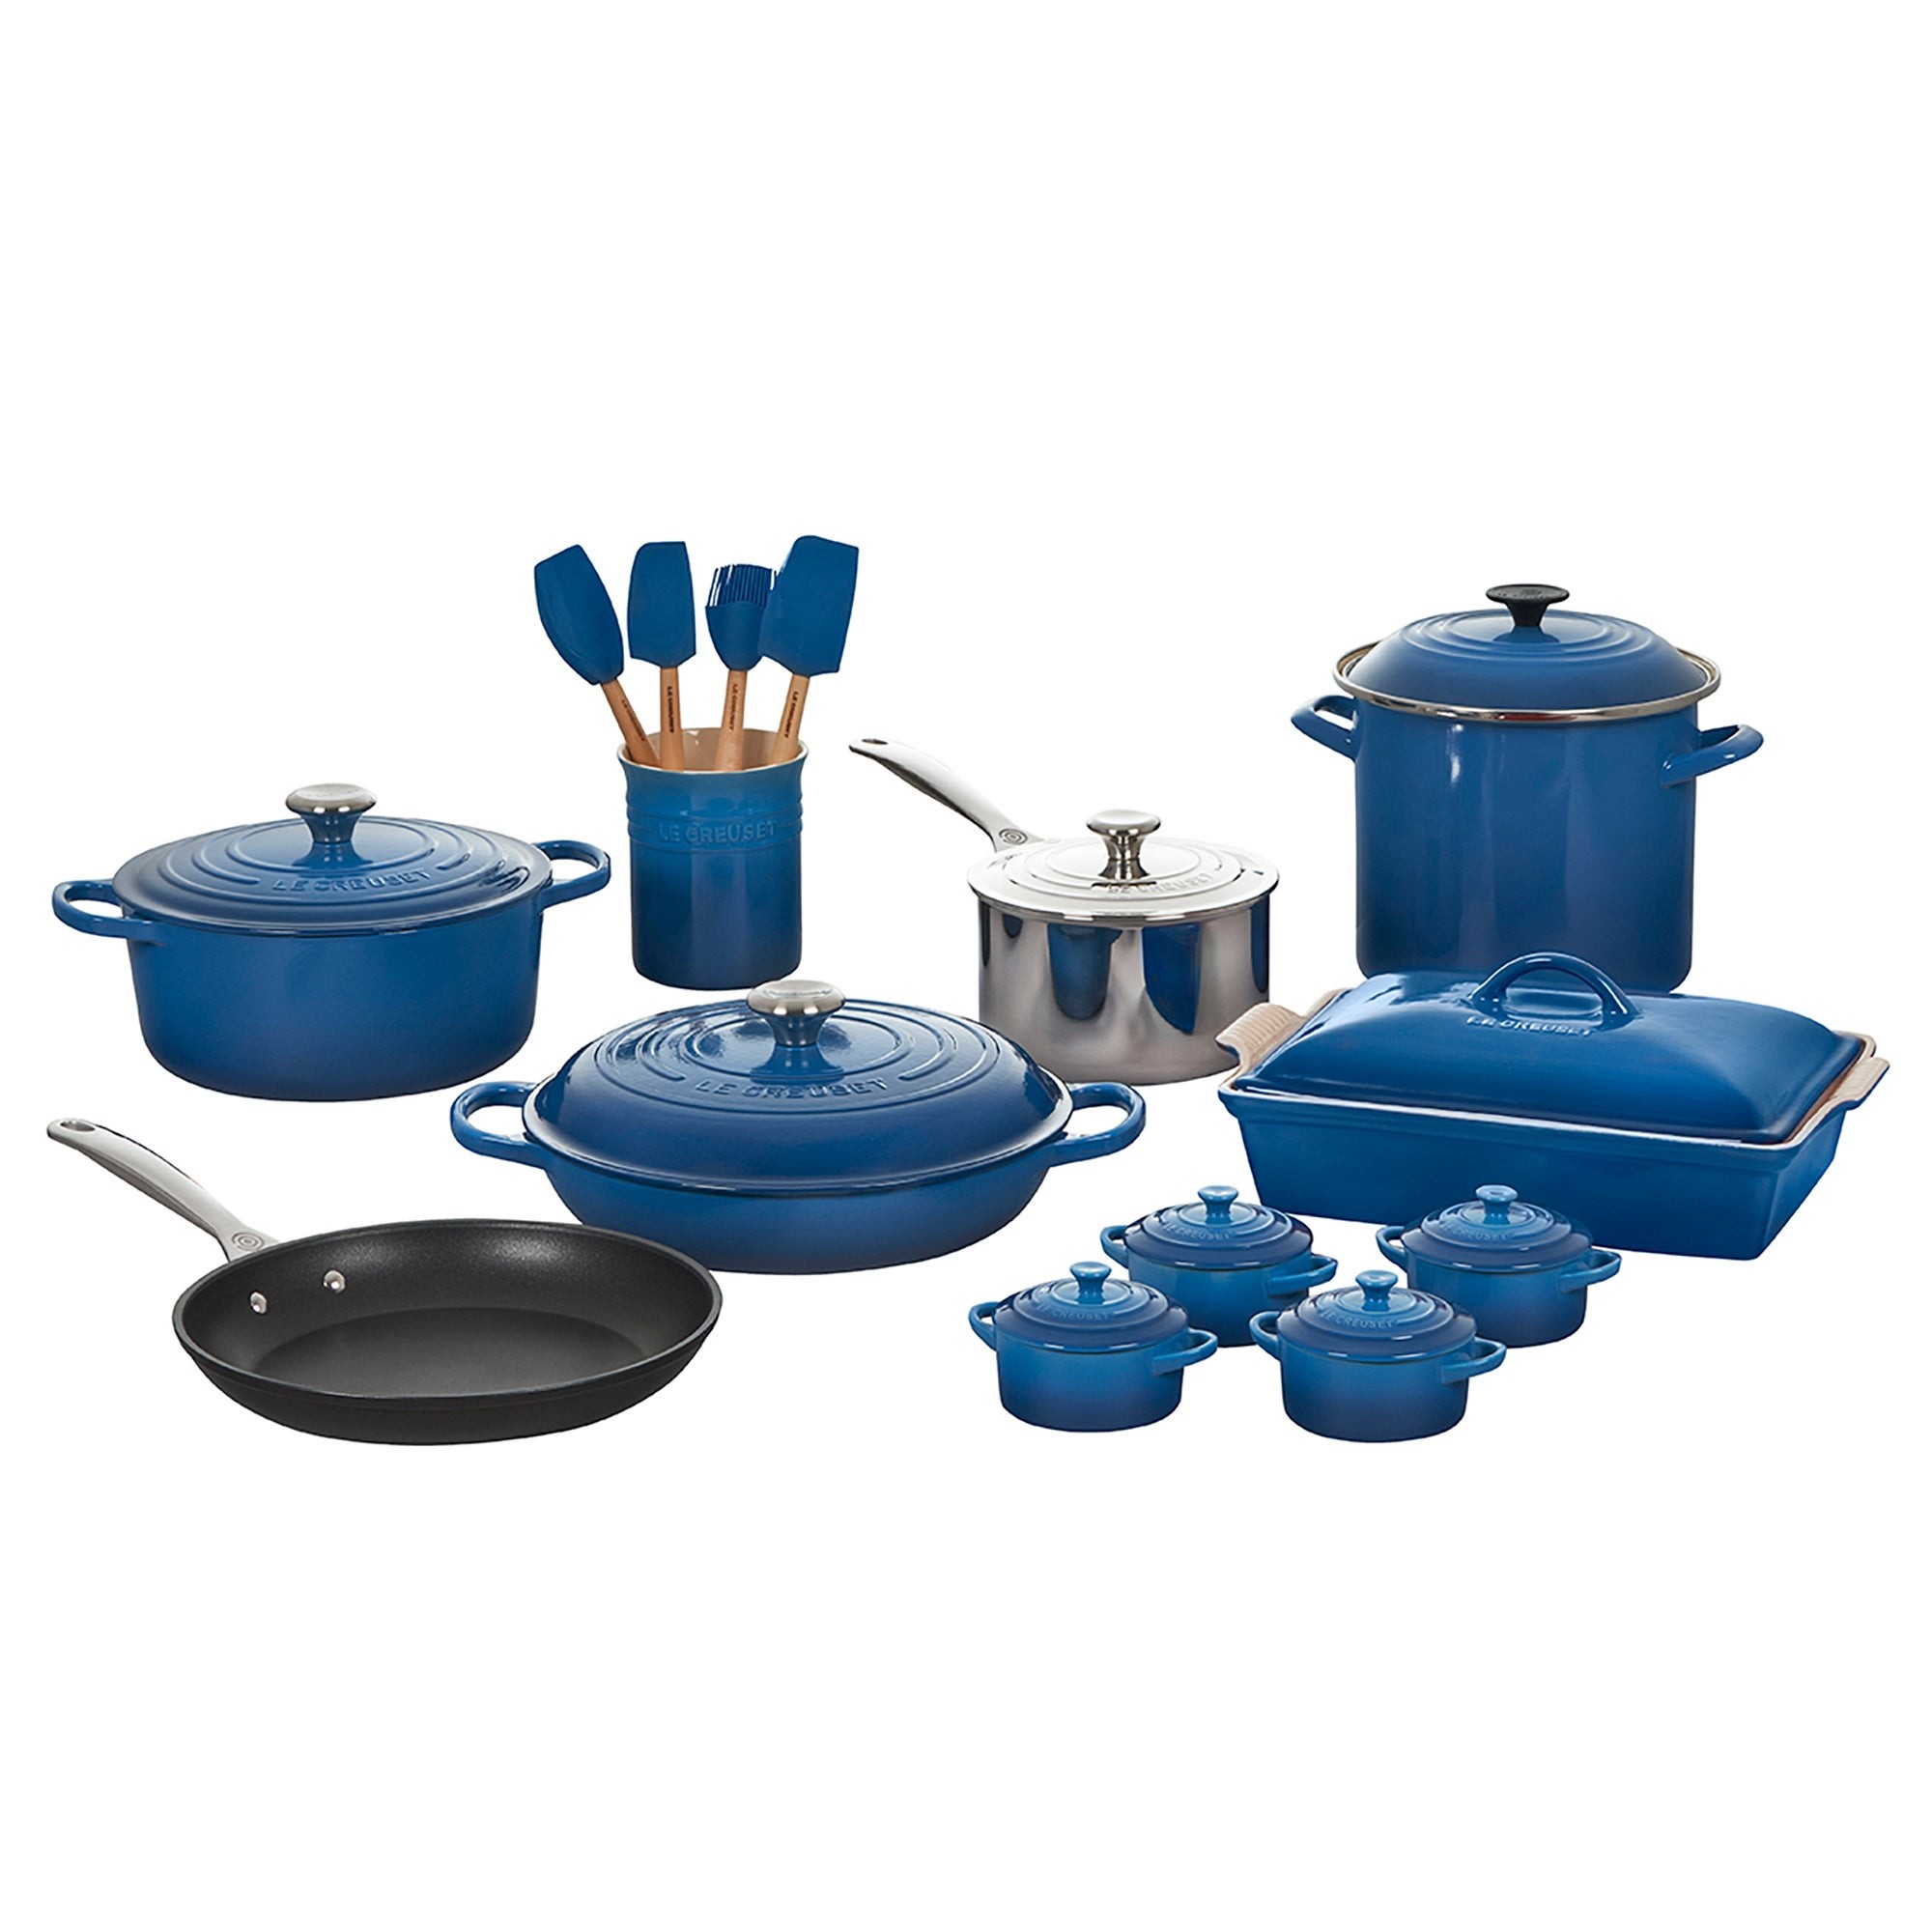 20pc Mixed Material Cookware & Kitchen Set Marseille